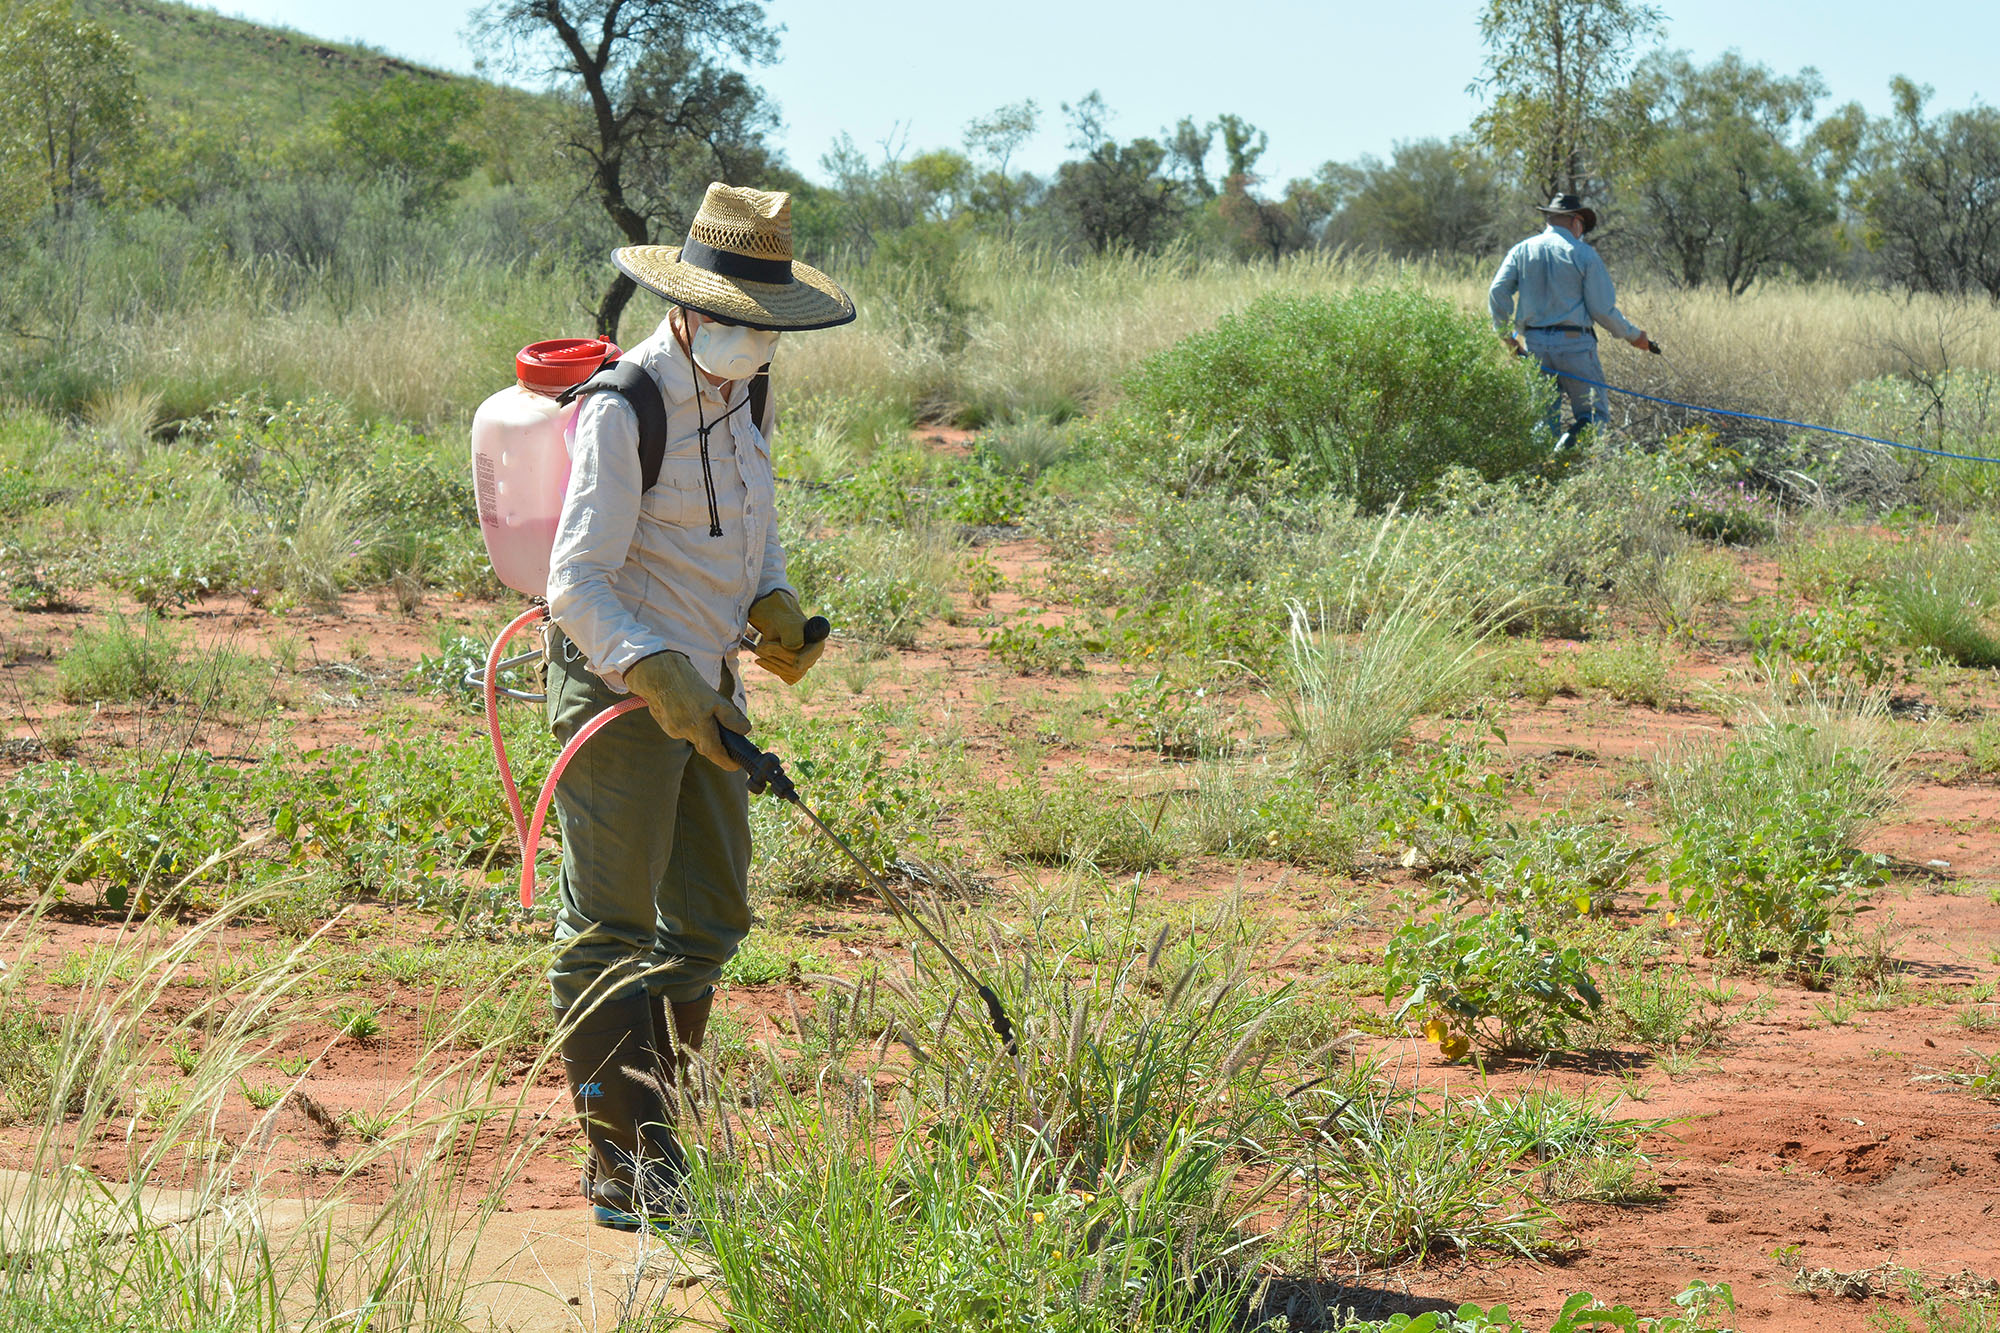 Volunteers Controlling Buffel Grass After Summer Rains, Newhaven Wildlife Sanctuary, Near The Tanami Desert, Central Australia, W Lawler